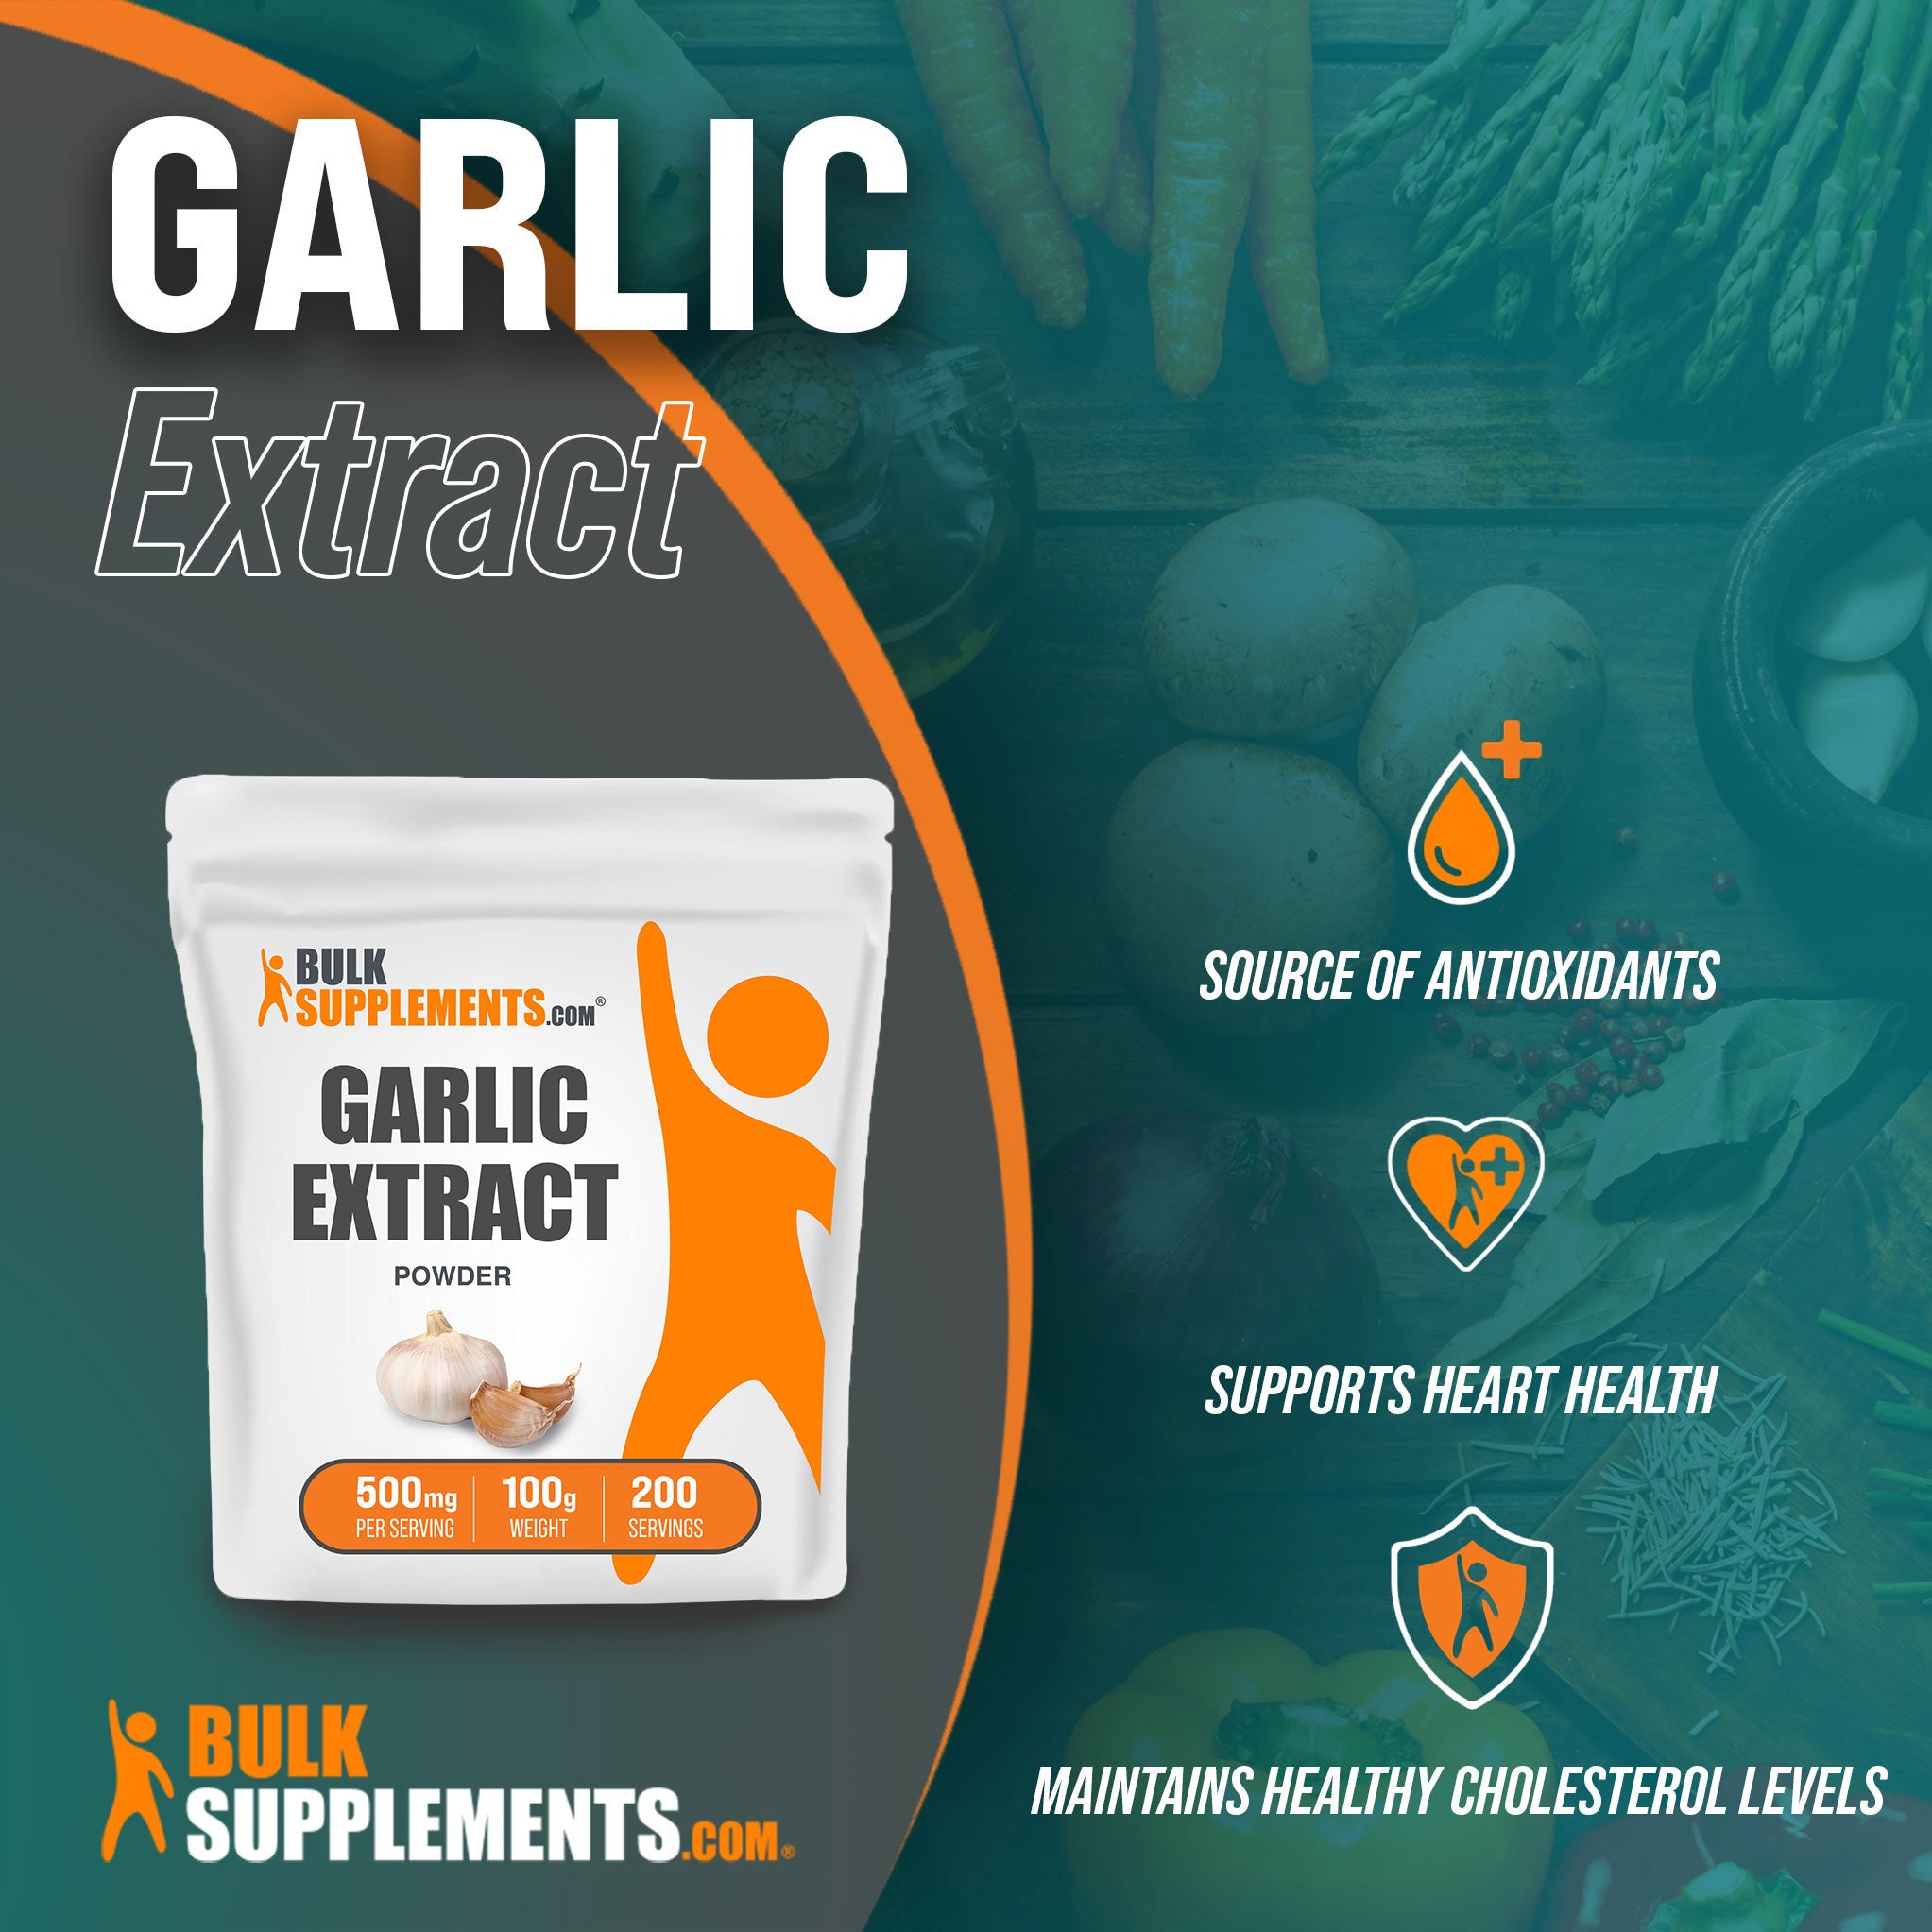 Benefits of Garlic Extract; source of antioxidants, supports heart health, maintains healthy cholesterol levels